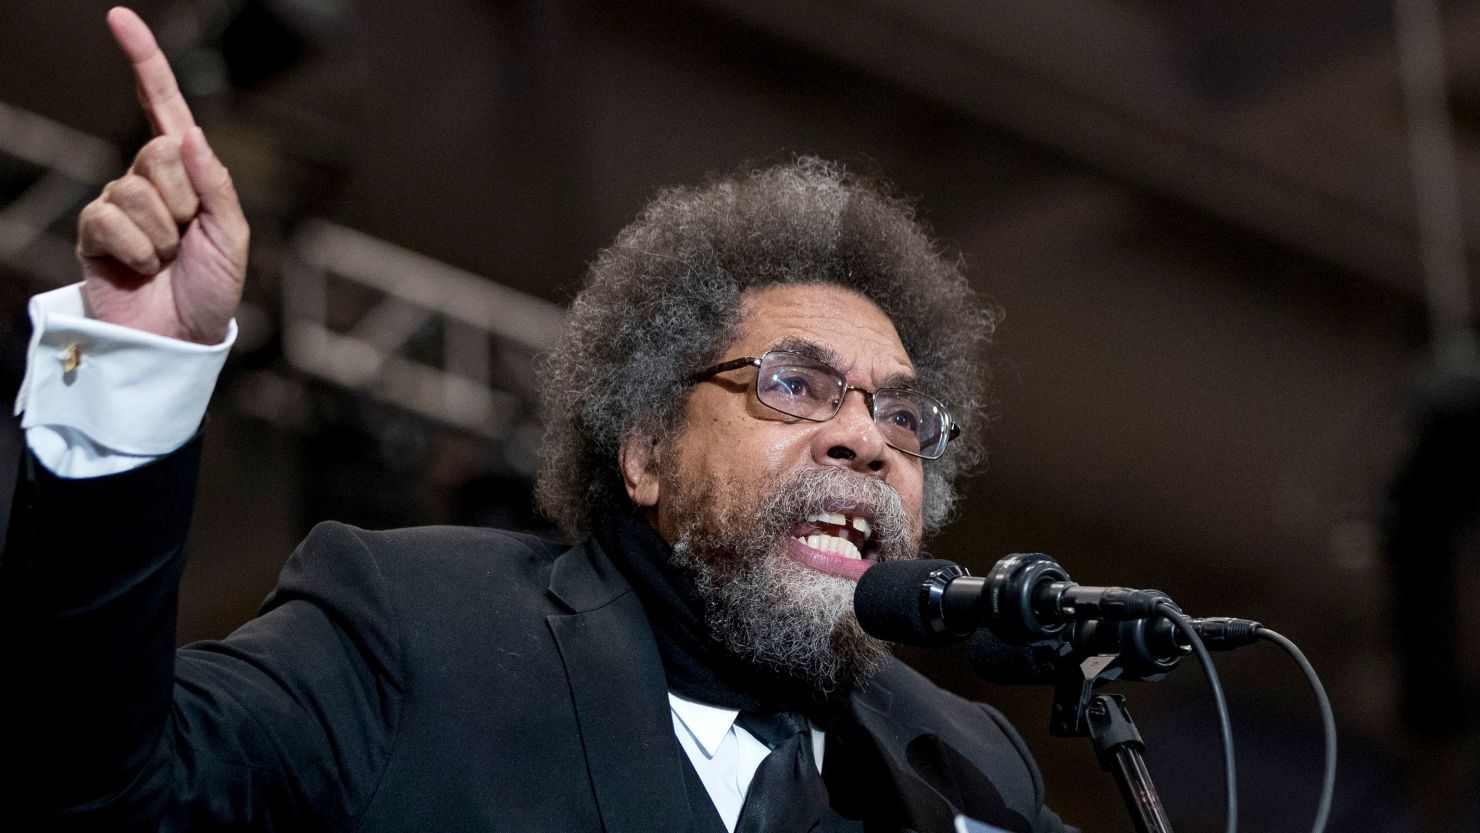 Harvard Professor Cornel West speaks at a campaign rally for Democratic presidential candidate Sen. Bernie Sanders at the Whittemore Center Arena at the University of New Hampshire on February 10, 2020, in Durham, New Hampshire. 